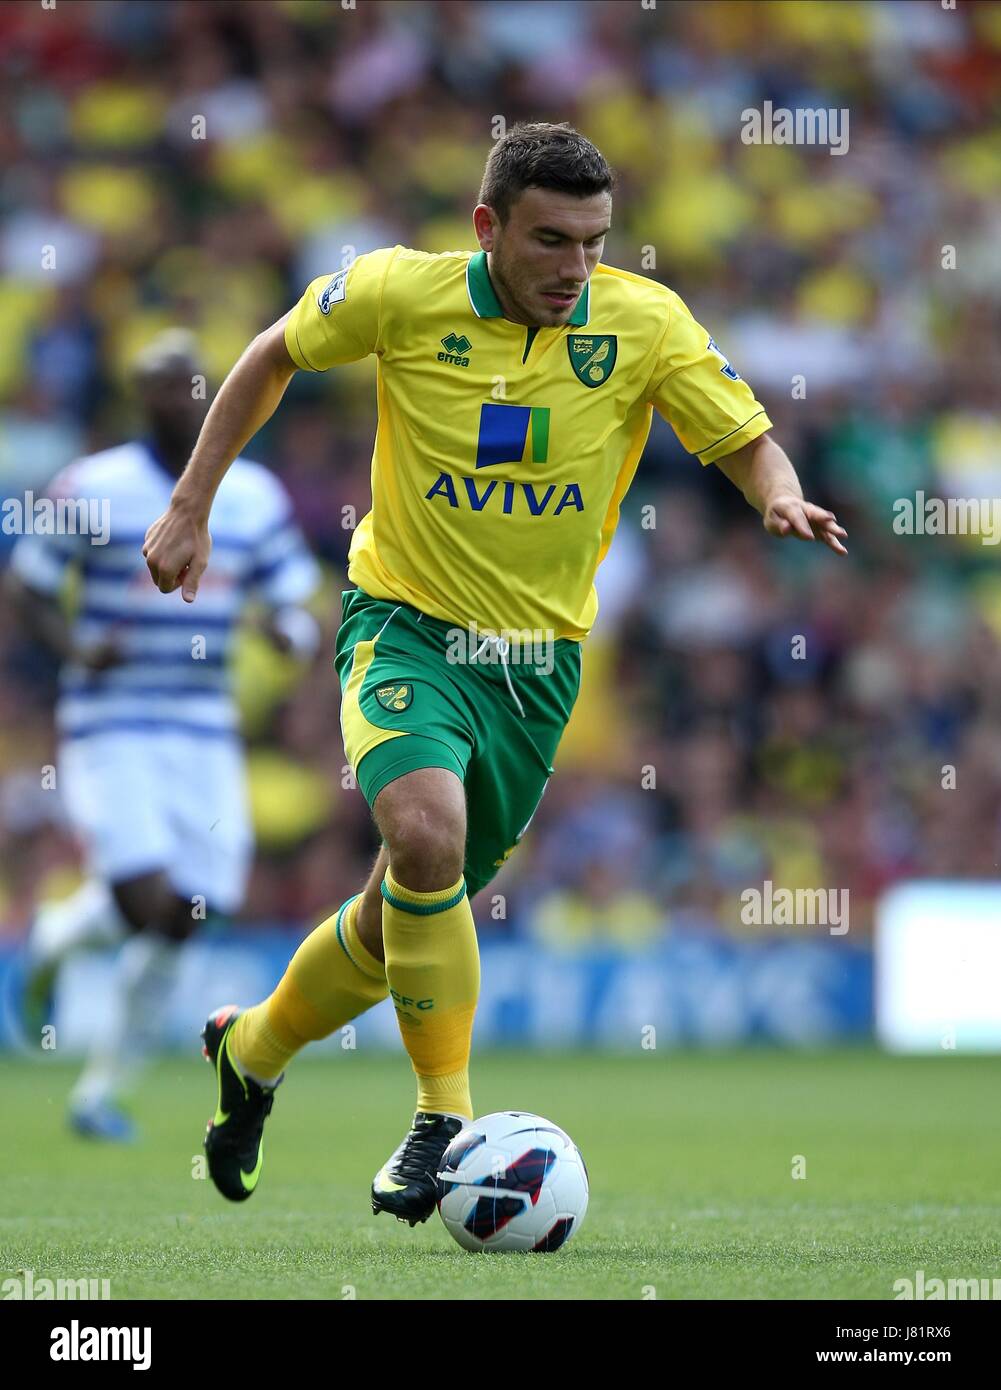 ROBERT SNODGRASS NORWICH CITY FC NORWICH CITY V QPR BARCLAYS PREMIER LEAGUE CARROW ROAD, NORWICH, ENGLAND 25 August 2012 GAO57018     WARNING! This Photograph May Only Be Used For Newspaper And/Or Magazine Editorial Purposes. May Not Be Used For Publications Involving 1 player, 1 Club Or 1 Competition  Without Written Authorisation From Football DataCo Ltd. For Any Queries, Please Contact Football DataCo Ltd on +44 (0) 207 864 9121 Stock Photo